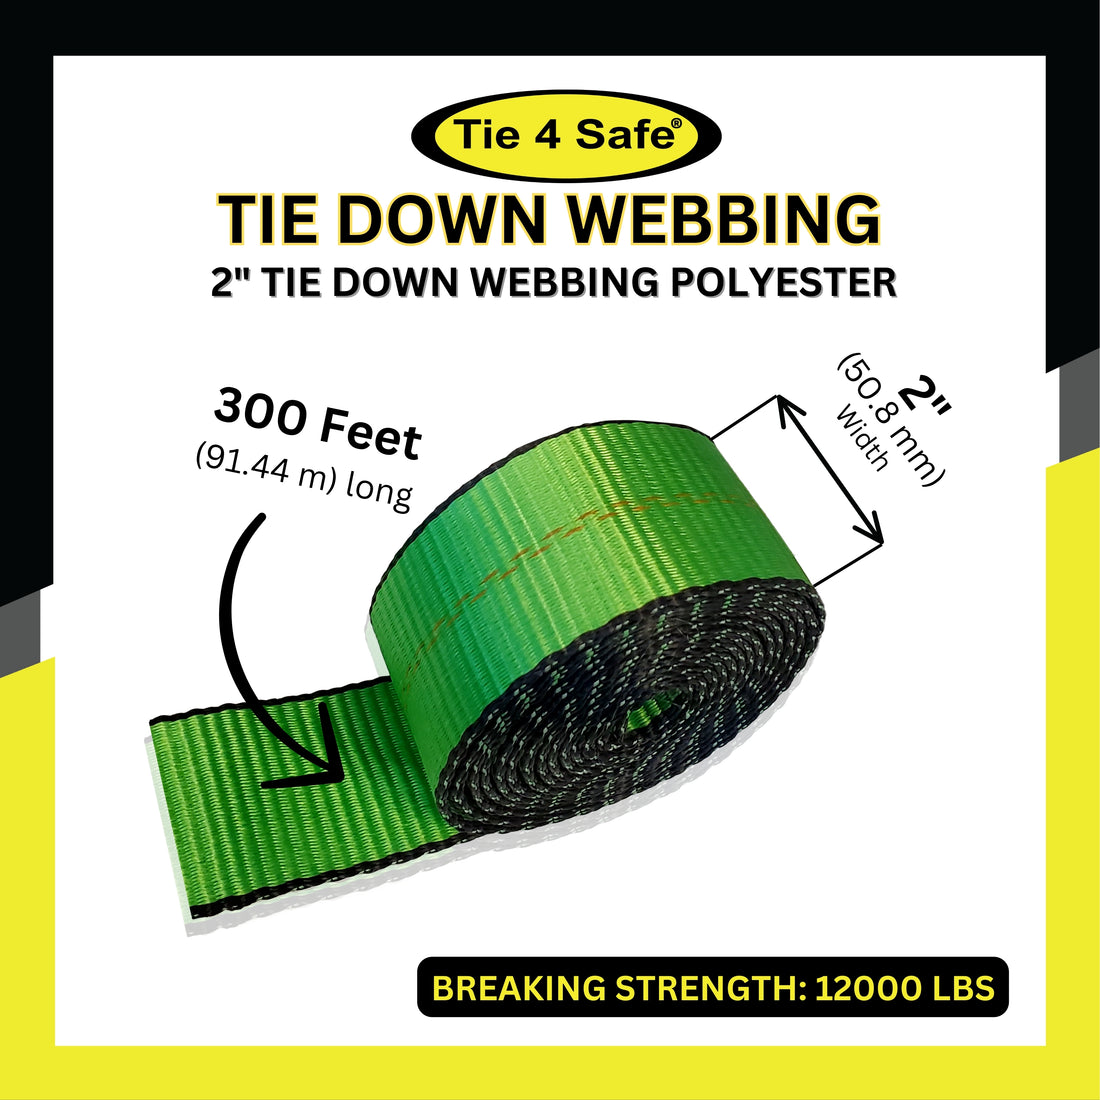 2" Tie Down Webbing Polyester - 12000 LBS